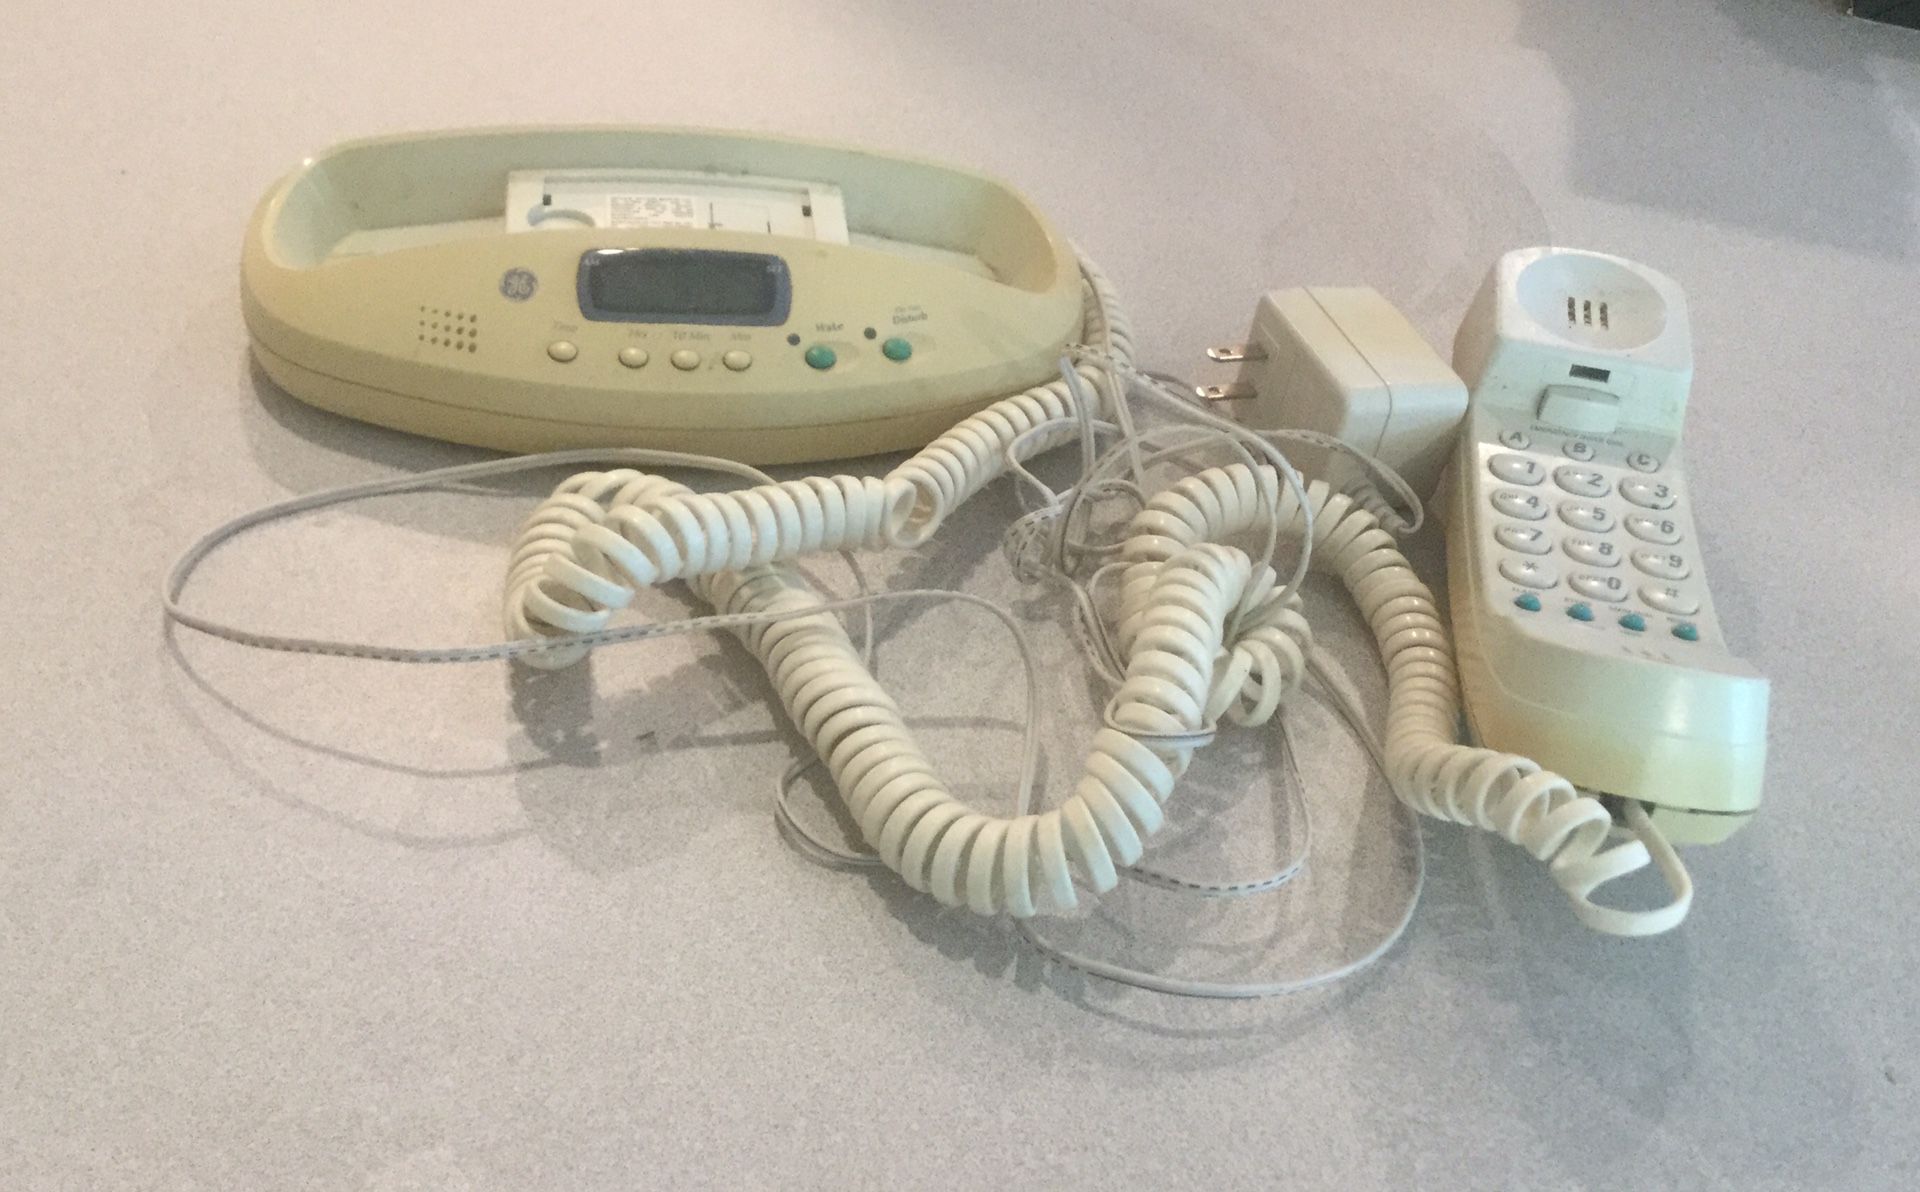 Take a step back into the 1980s with this vintage Antique telephone